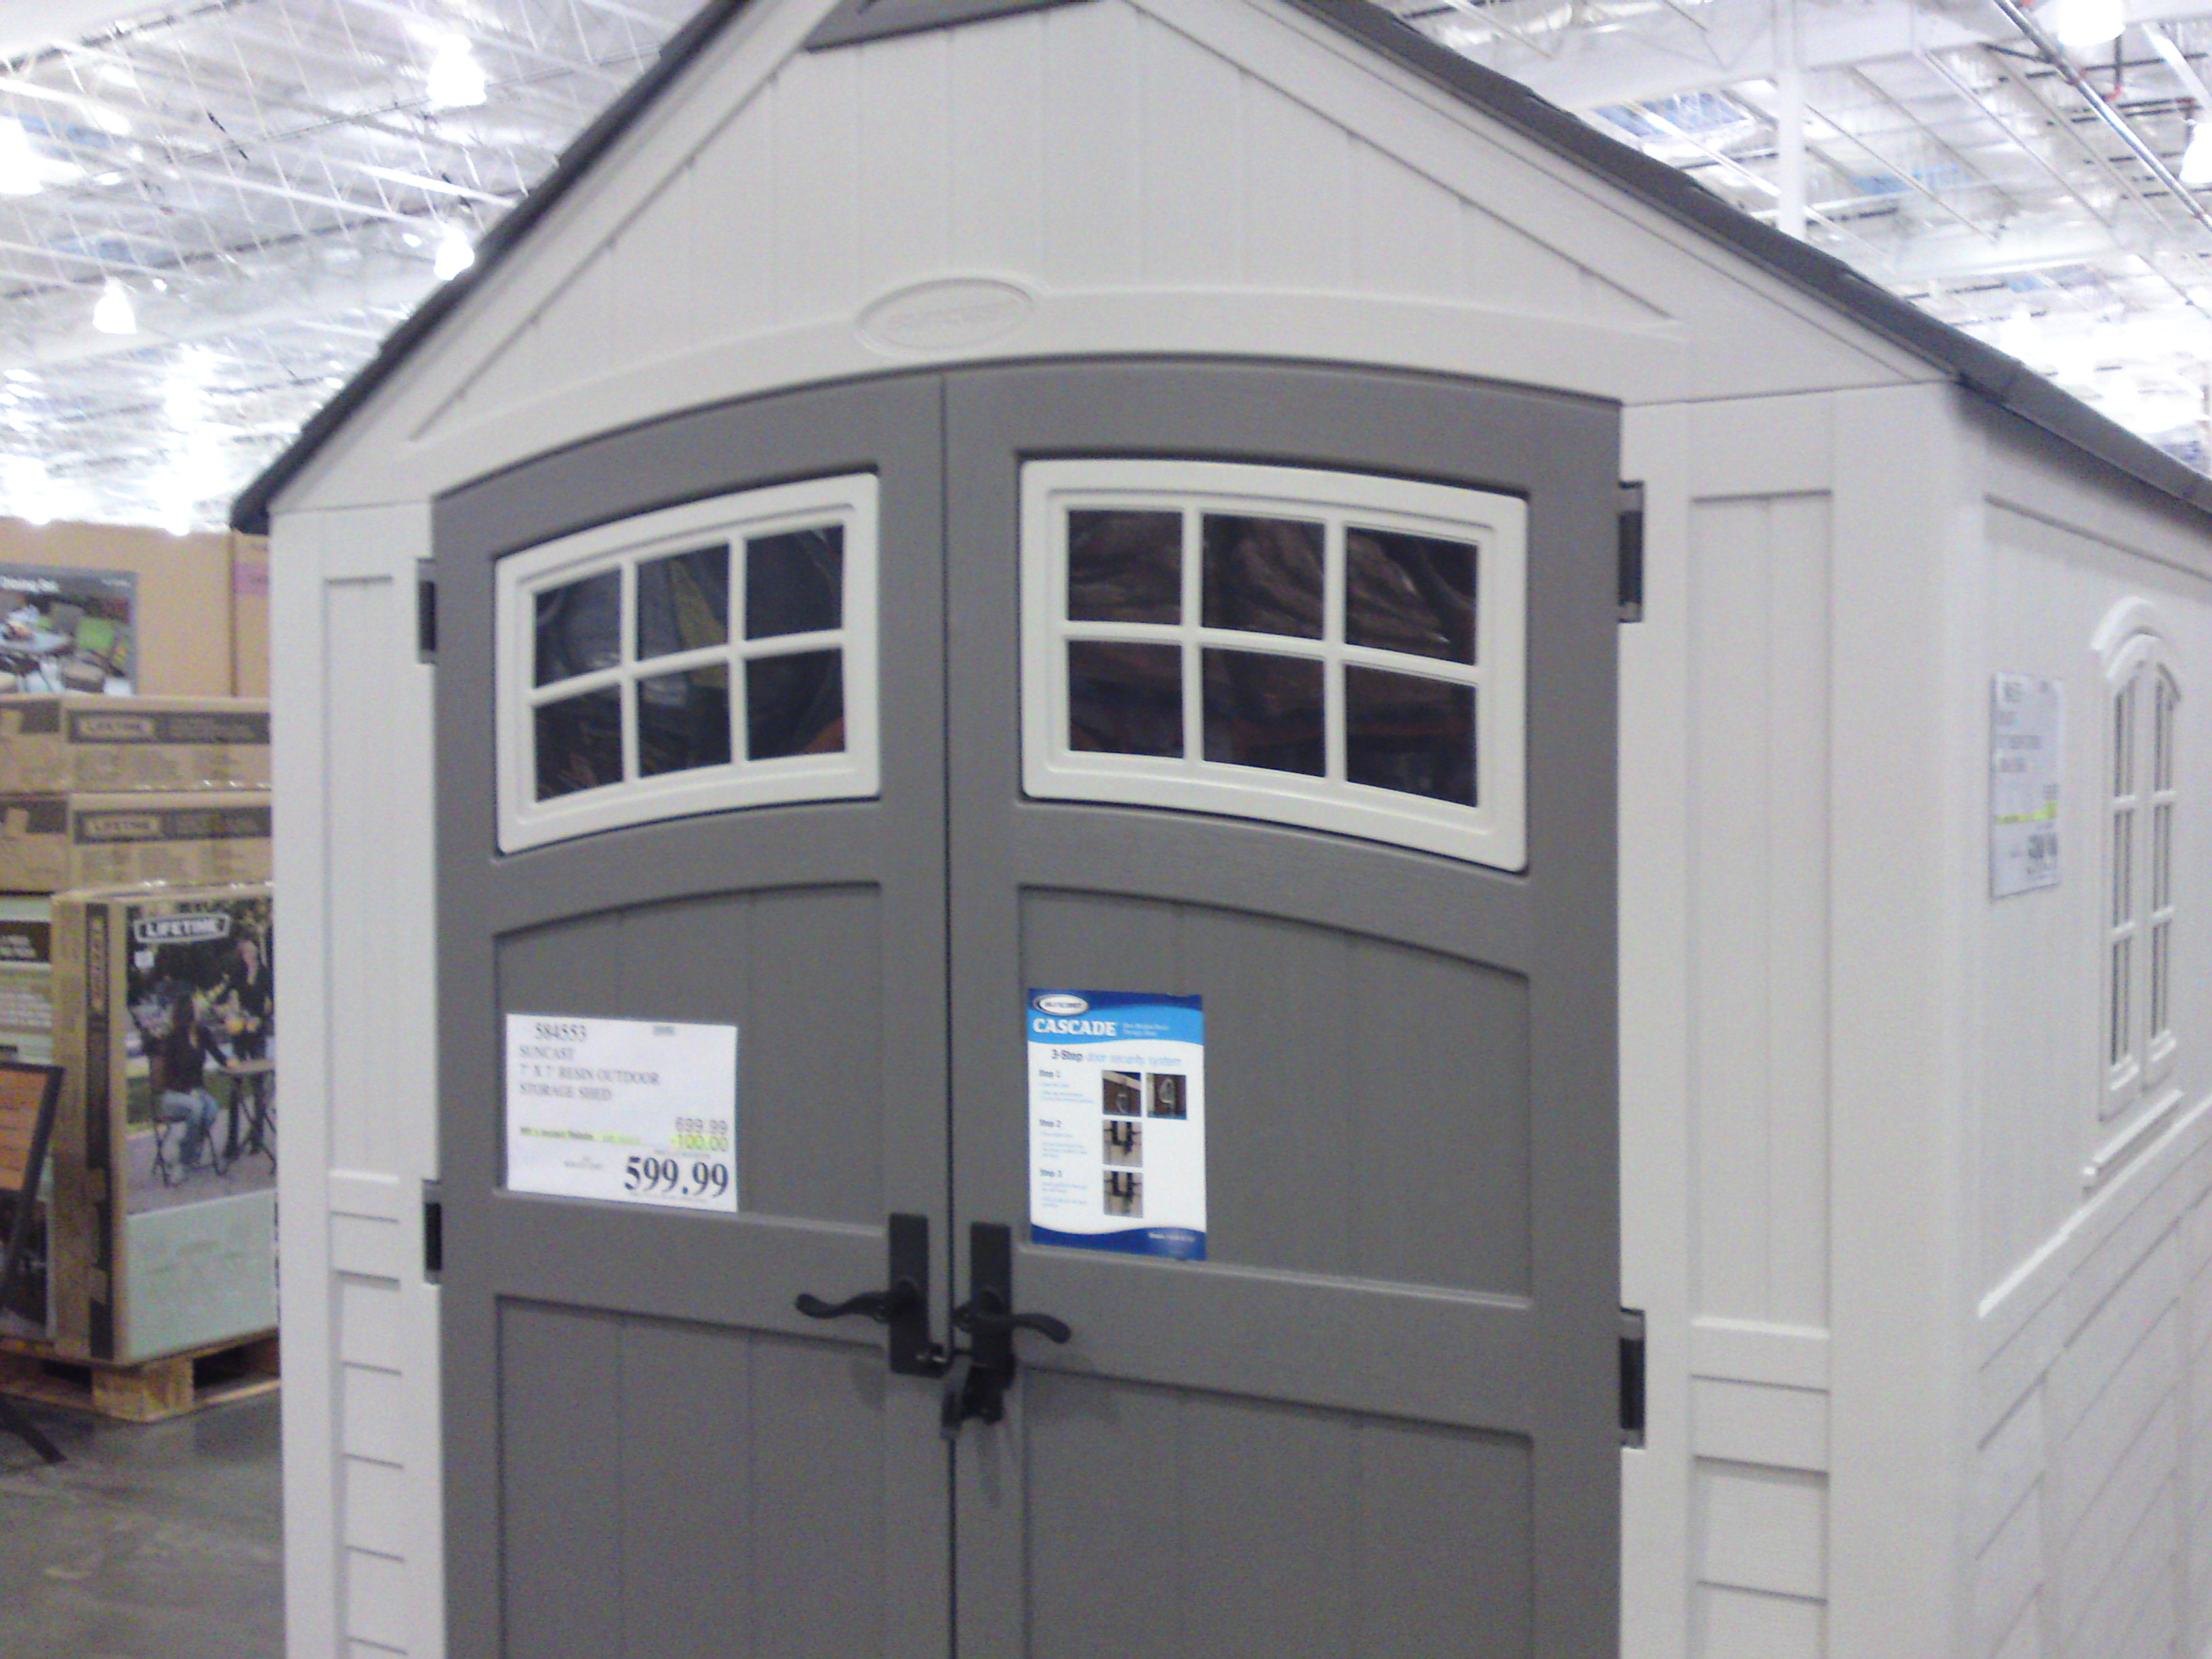 Free Shed Plans Here Suncast Storage Shed At Costco